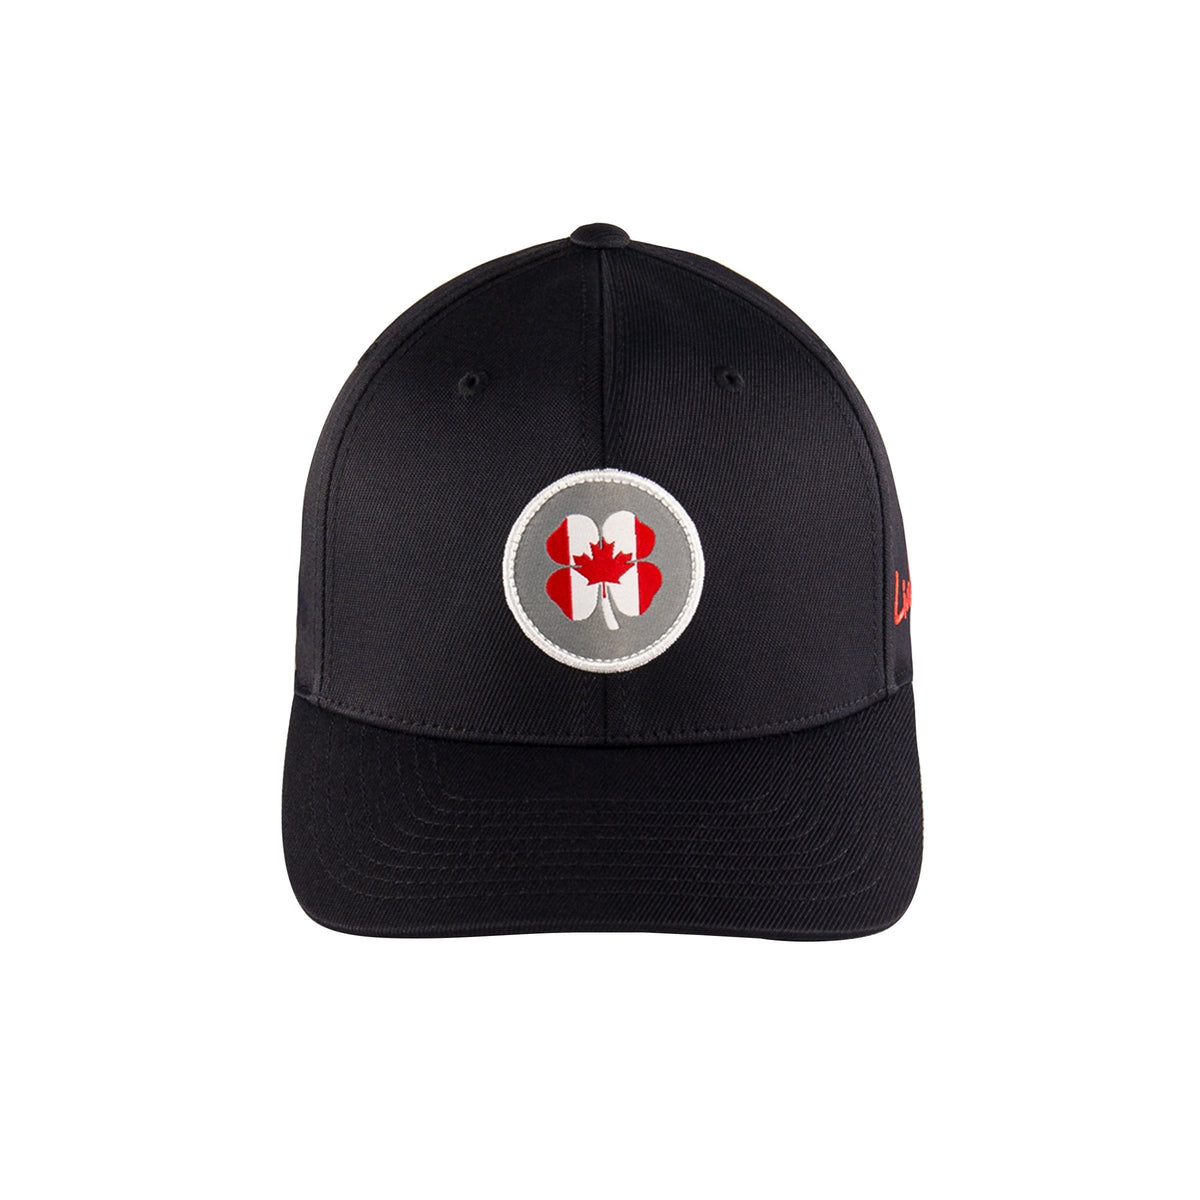 Black Clover Baseball Caps Canada Flag Nation - Snapback equestrian team apparel online tack store mobile tack store custom farm apparel custom show stable clothing equestrian lifestyle horse show clothing riding clothes horses equestrian tack store